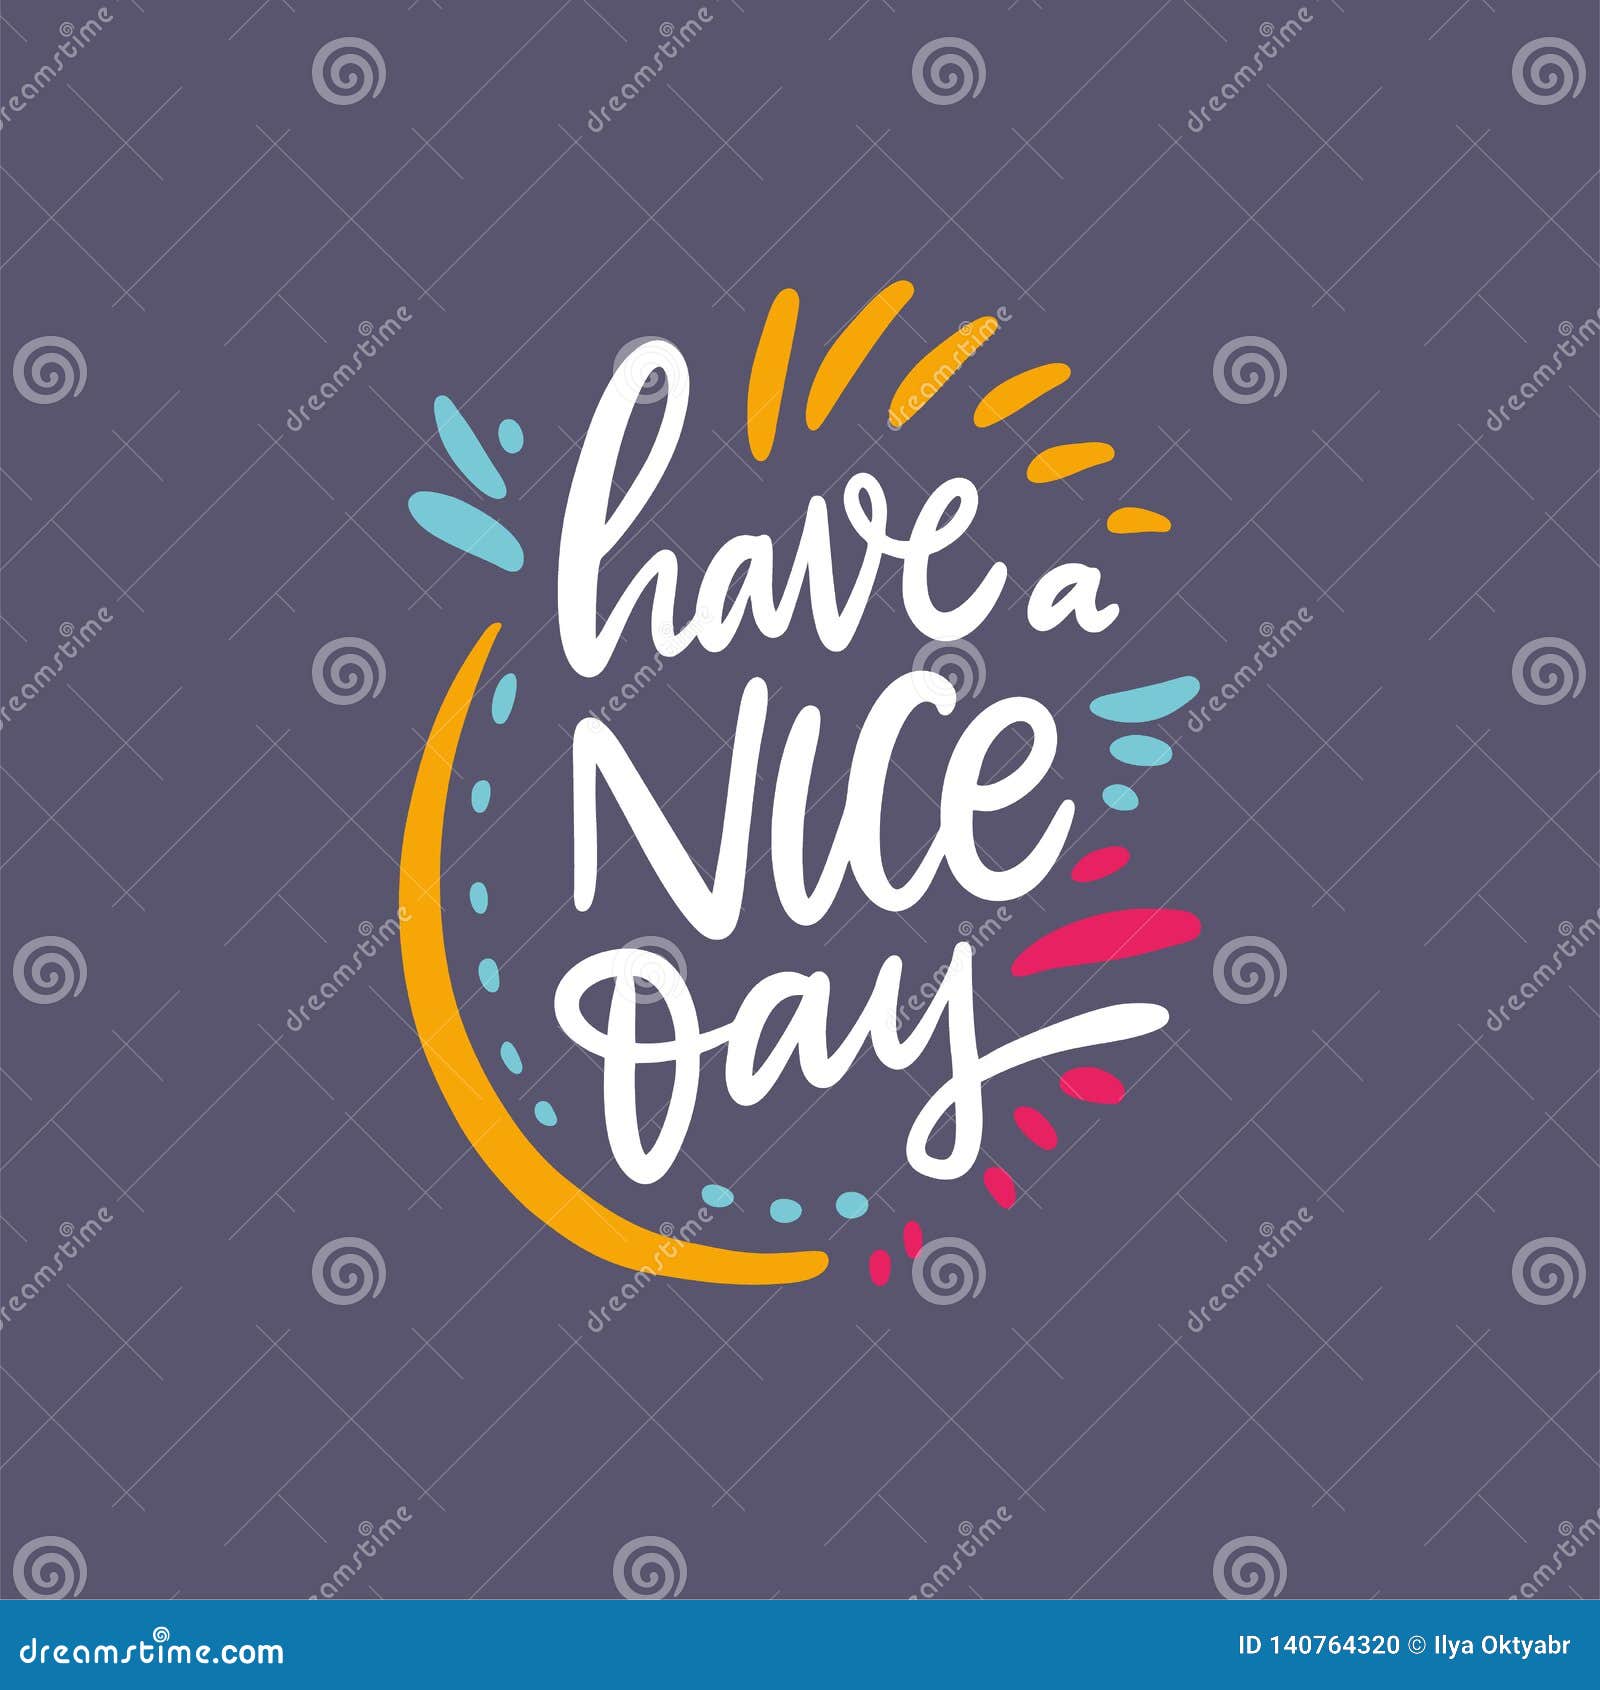 Have Nice Day Card Graphic Hand Drawing Stock Illustrations 99 Have Nice Day Card Graphic Hand Drawing Stock Illustrations Vectors Clipart Dreamstime